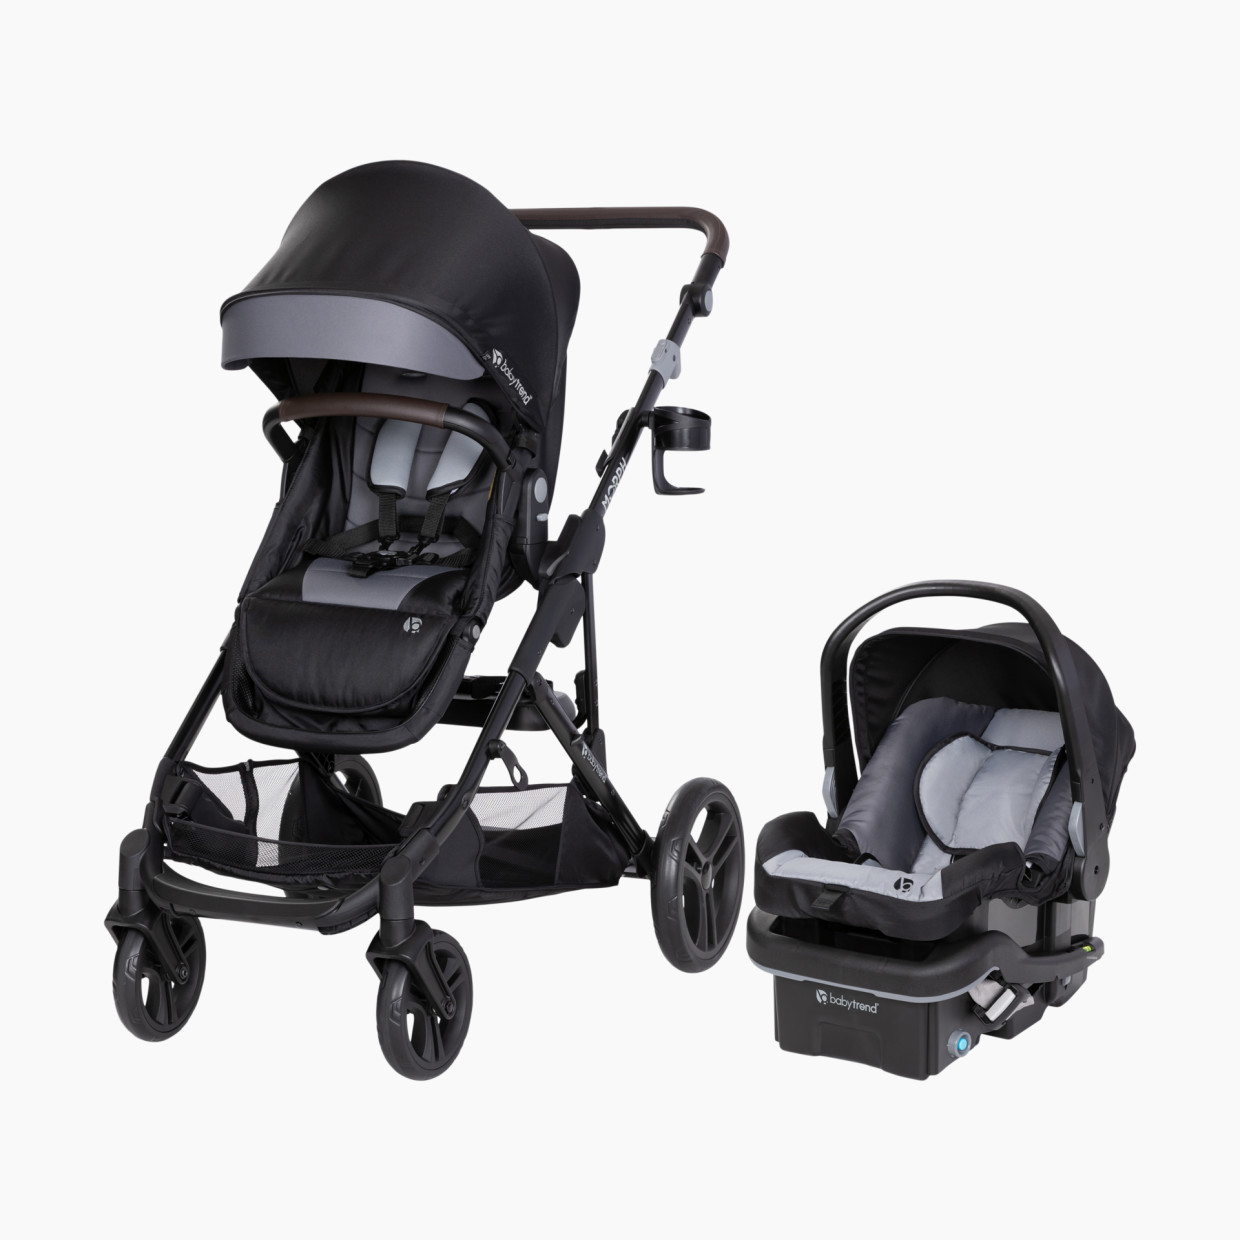 Baby Trend Morph Single to Double Modular Travel System - Dash Black.